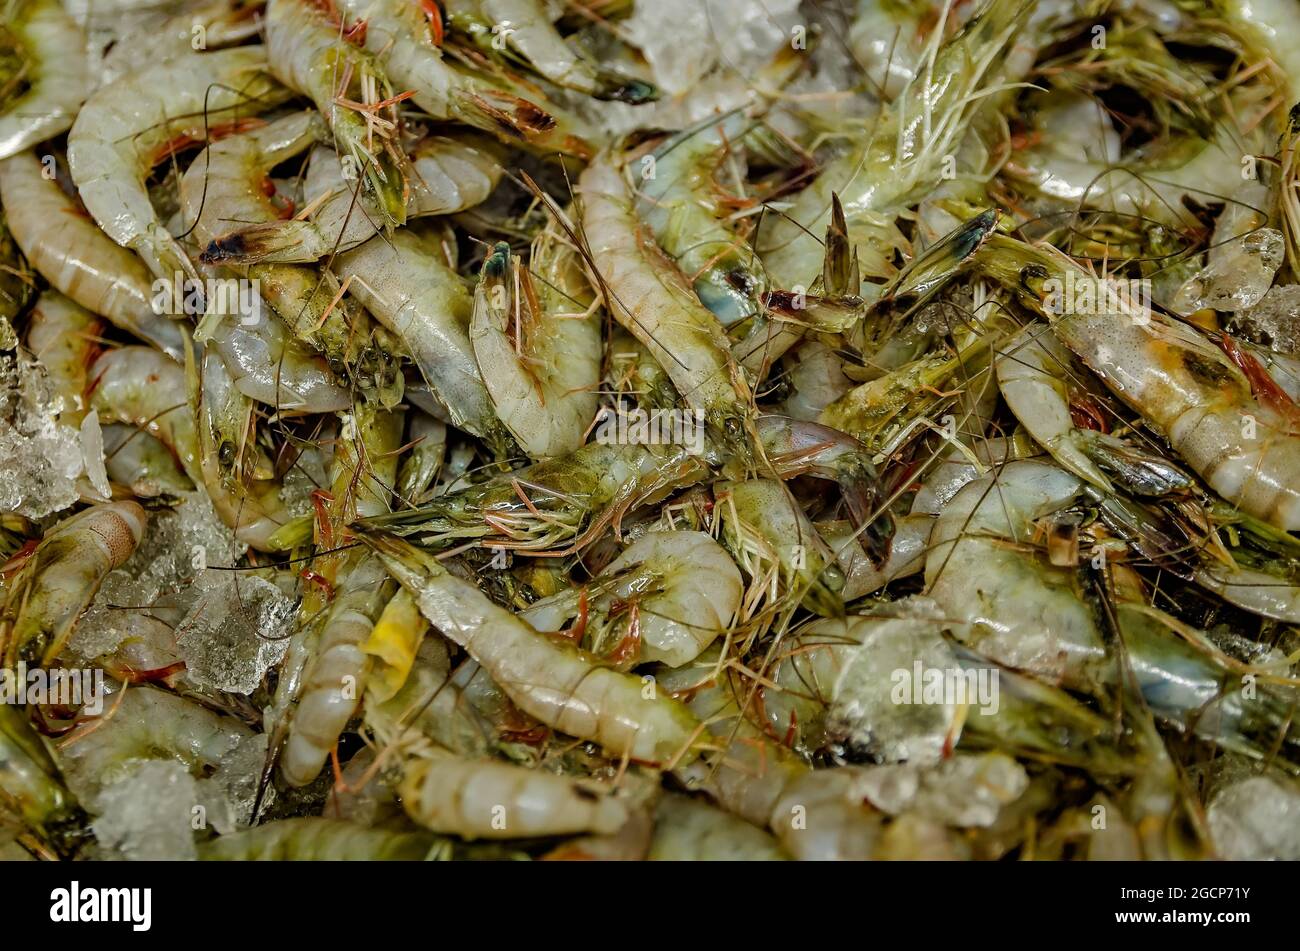 Brown shrimp are displayed on ice at Jemison’s Bait-N-Tackle, January 3, 2017, in Coden, Alabama. The bait shop opened in the 1940s. Stock Photo